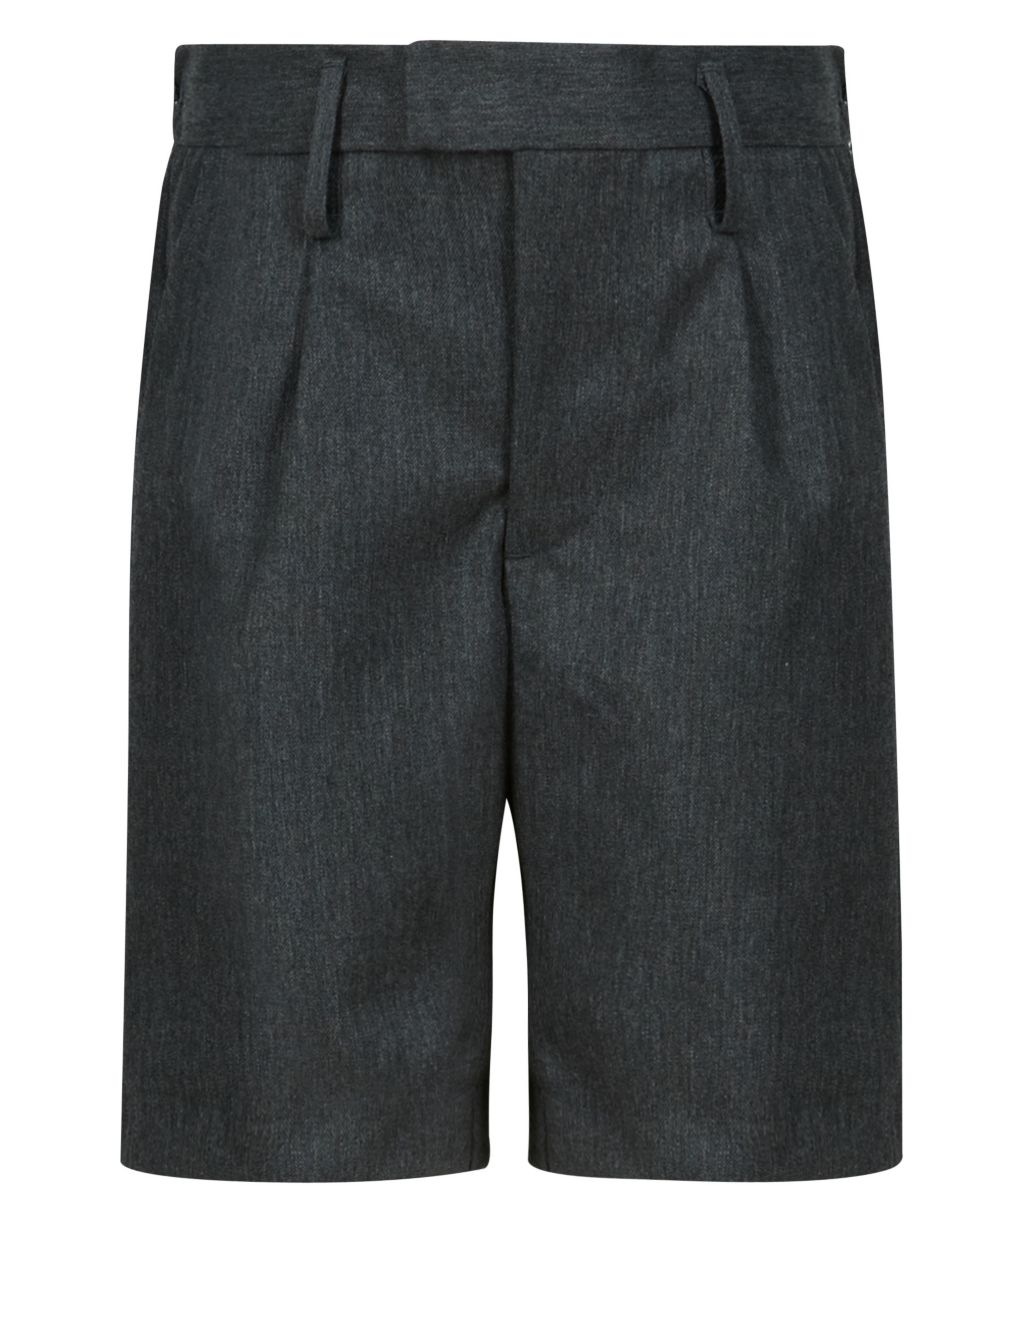 Boys' Adjustable Waistband Crease Resistant Shorts with Wool 1 of 3